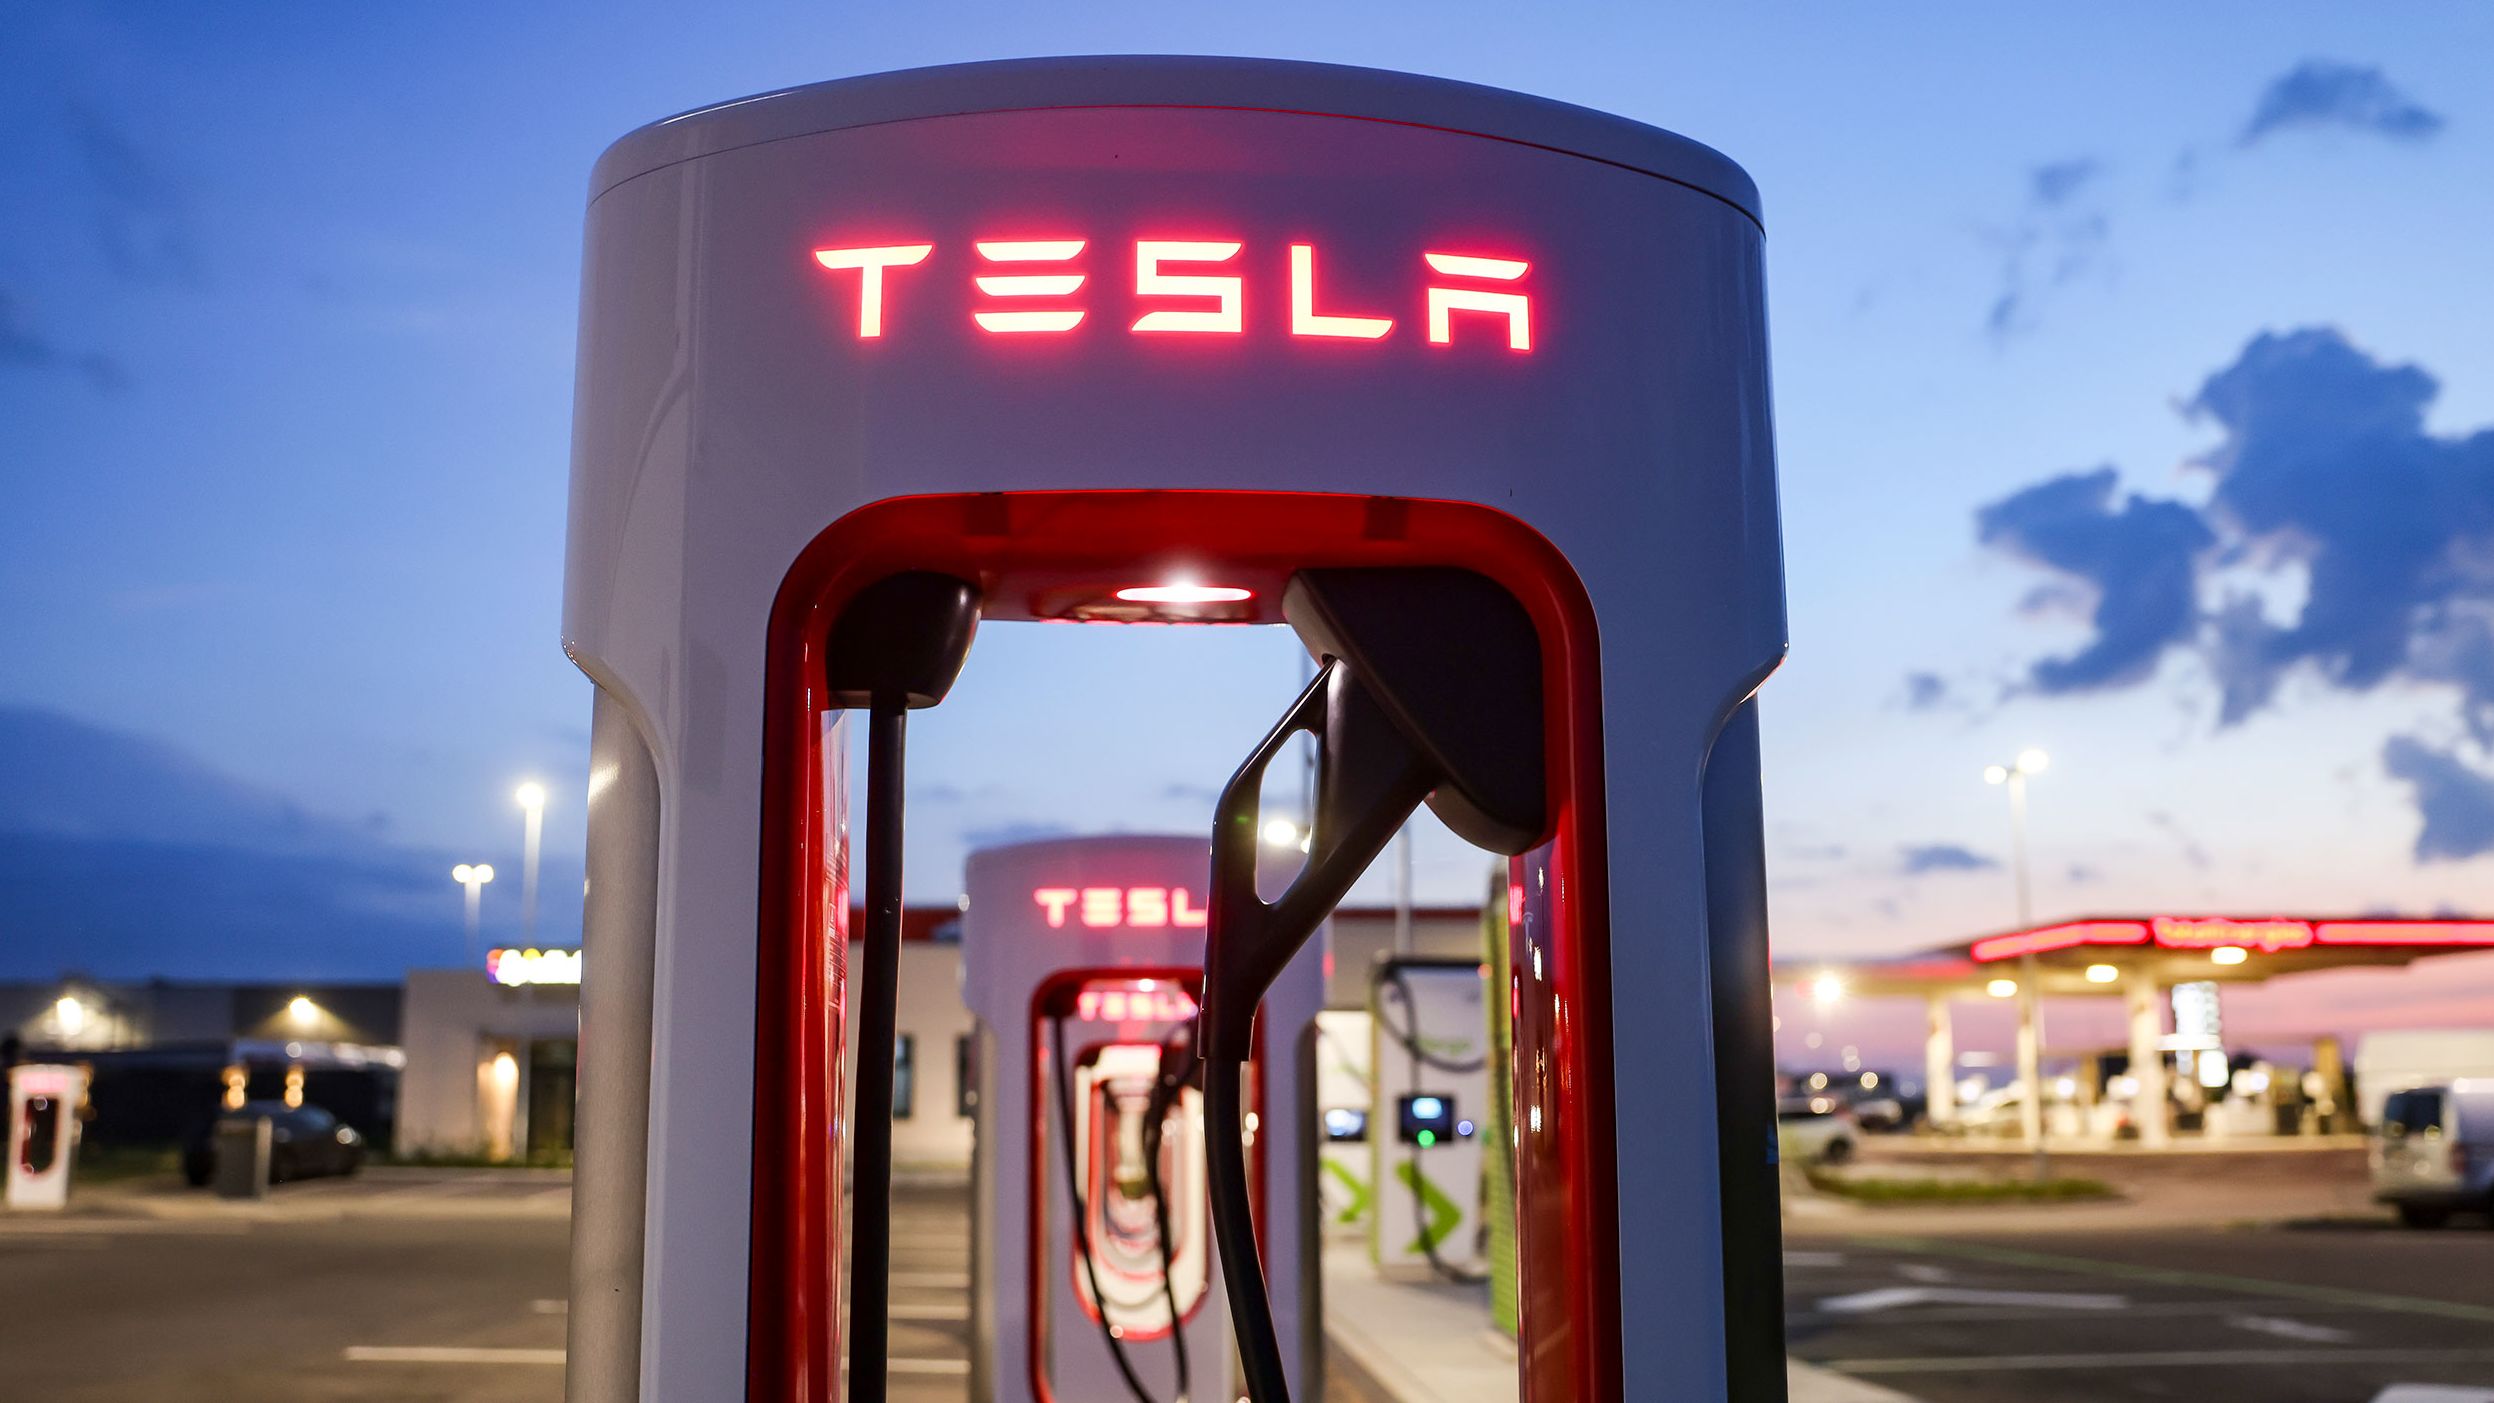 Tesla officially opens its charging network to non-Tesla cars | CNN Business